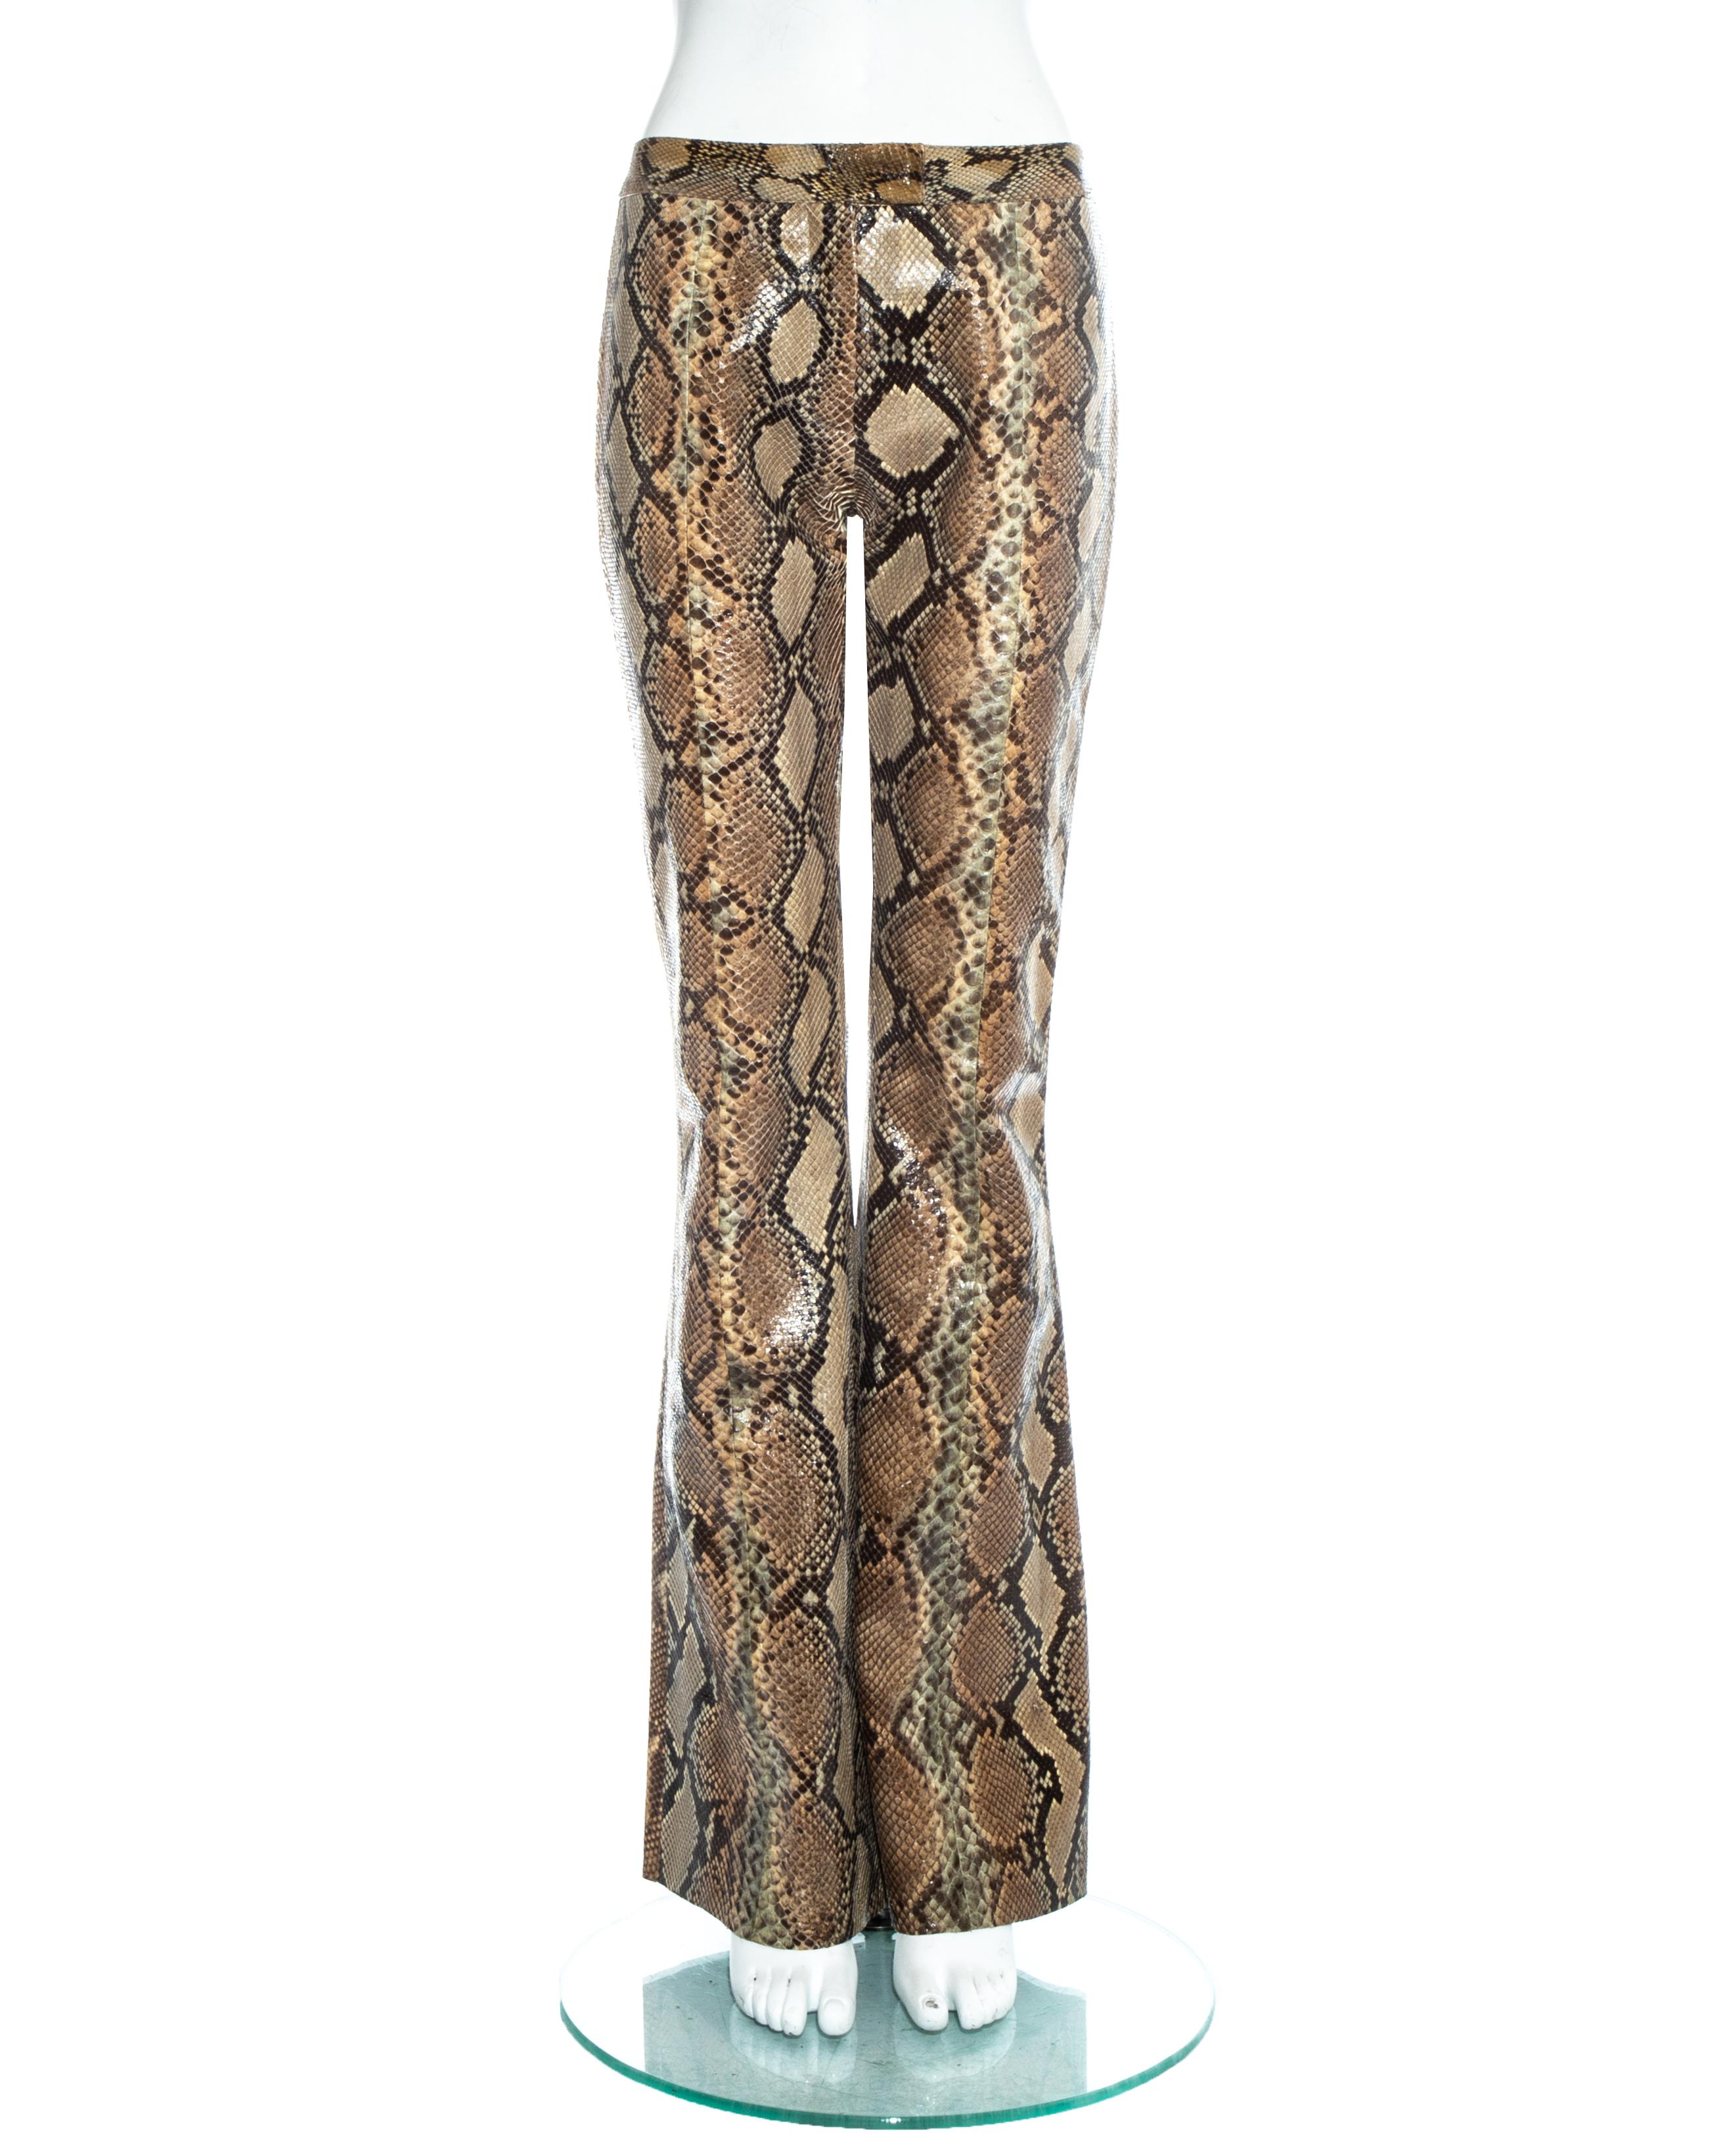 Gucci by Tom Ford, Tan python snakeskin flared pants.  Spring-Summer 2000